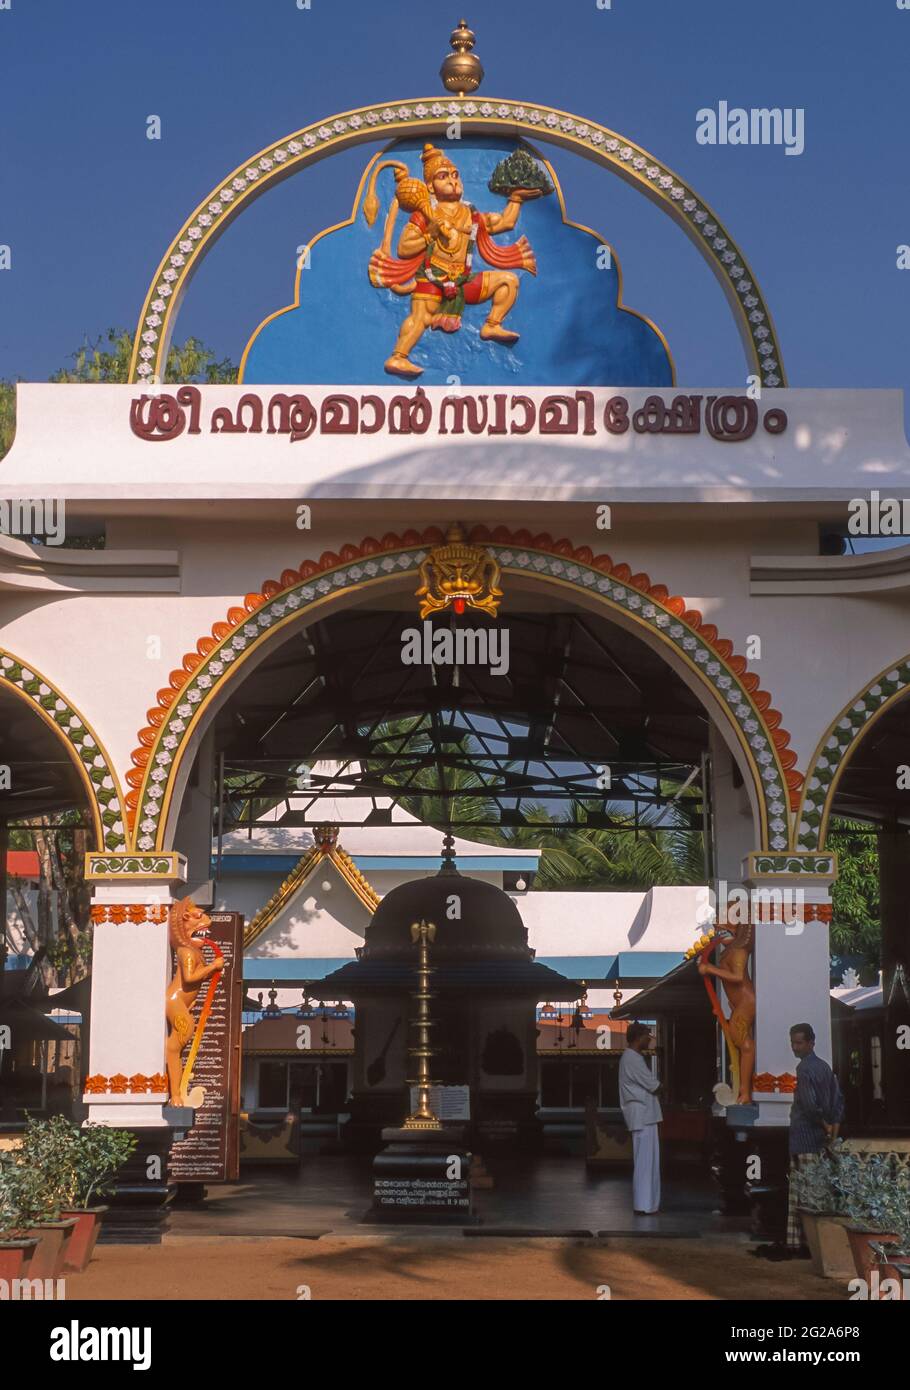 THRISSUR, KERALA, INDIA - Depiction of Hindu god Hanuman over archway of temple. Stock Photo